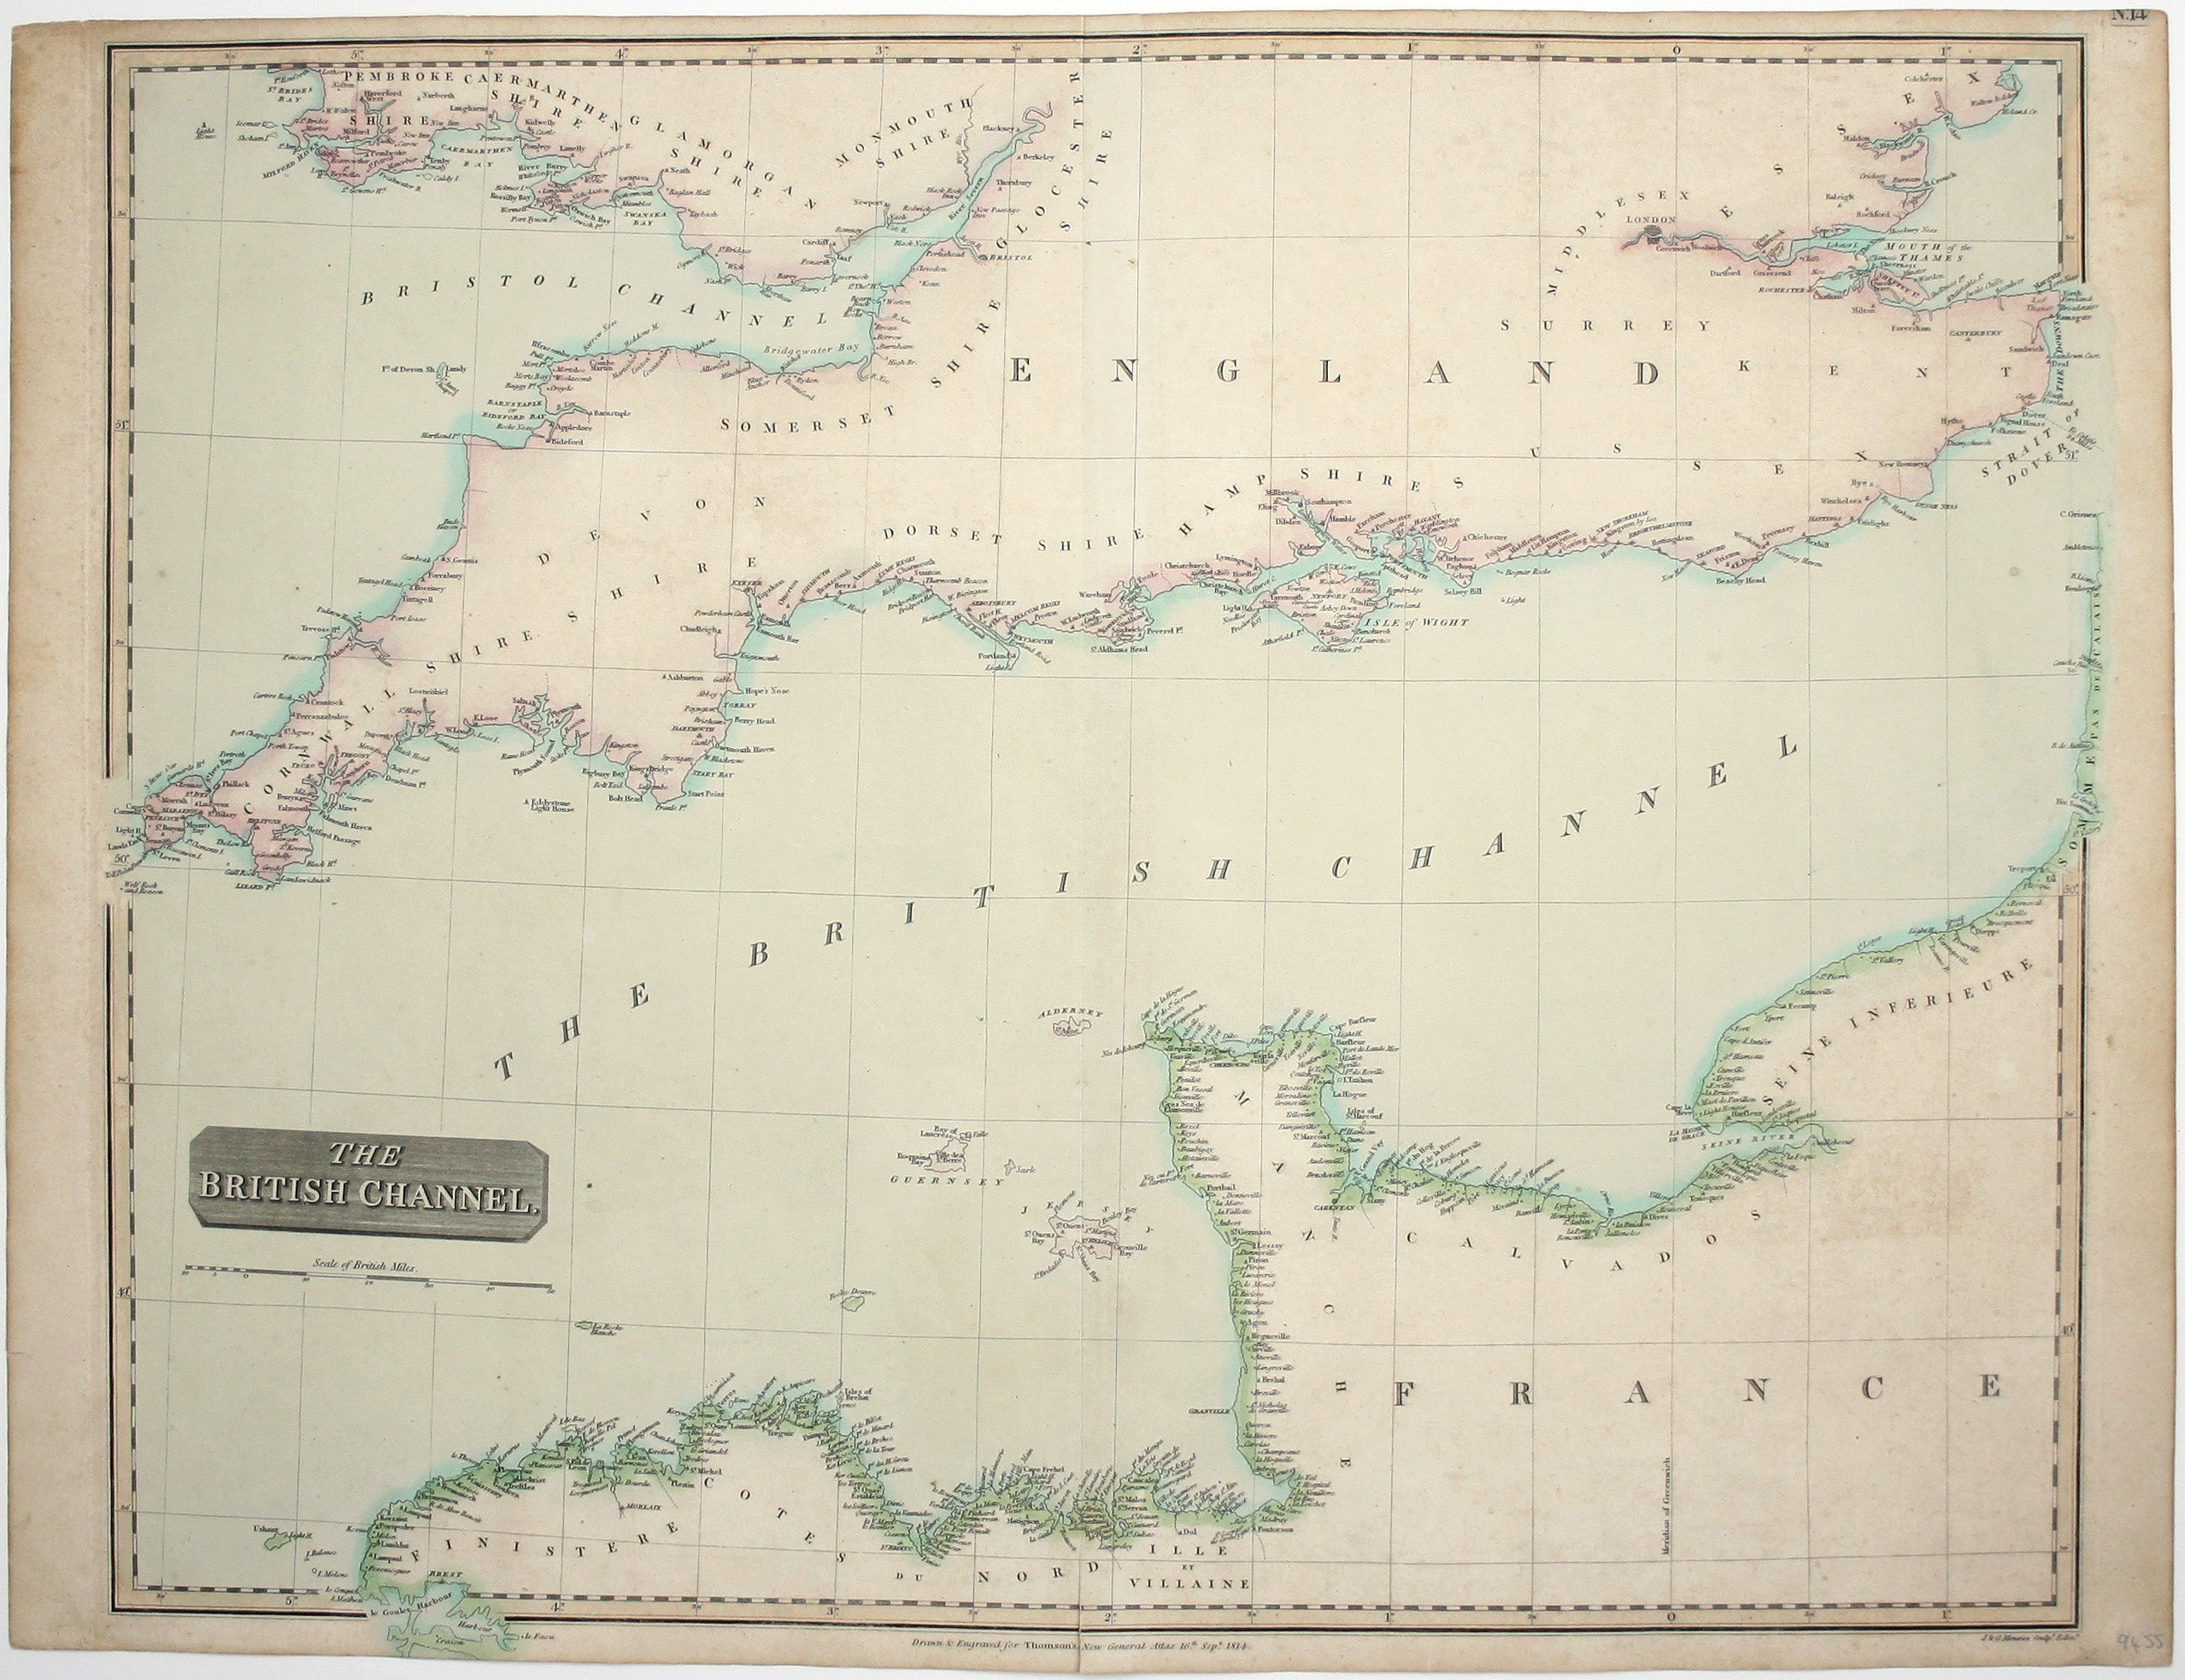 Thomson’s Map of the English Channel